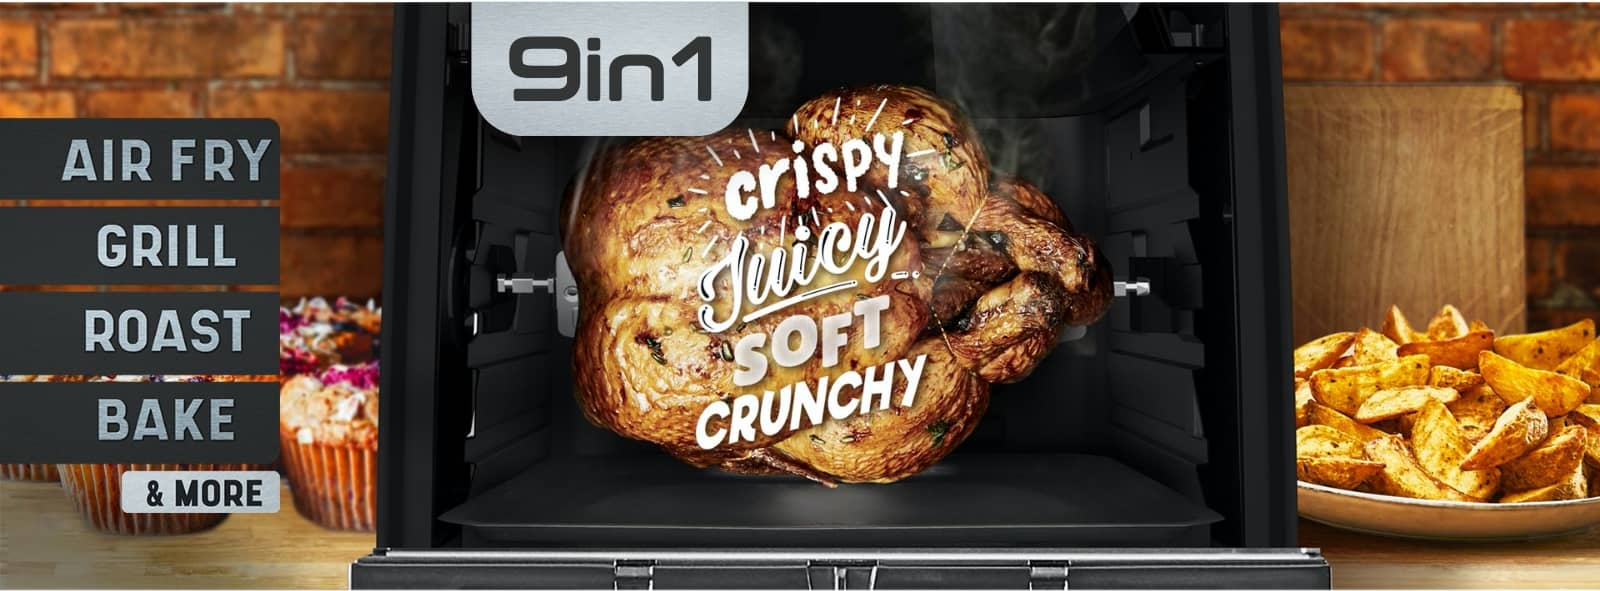 EasyFry 9in1 Air Fryer, Grill, Roast and Bake, roasting chicken and air fried chips